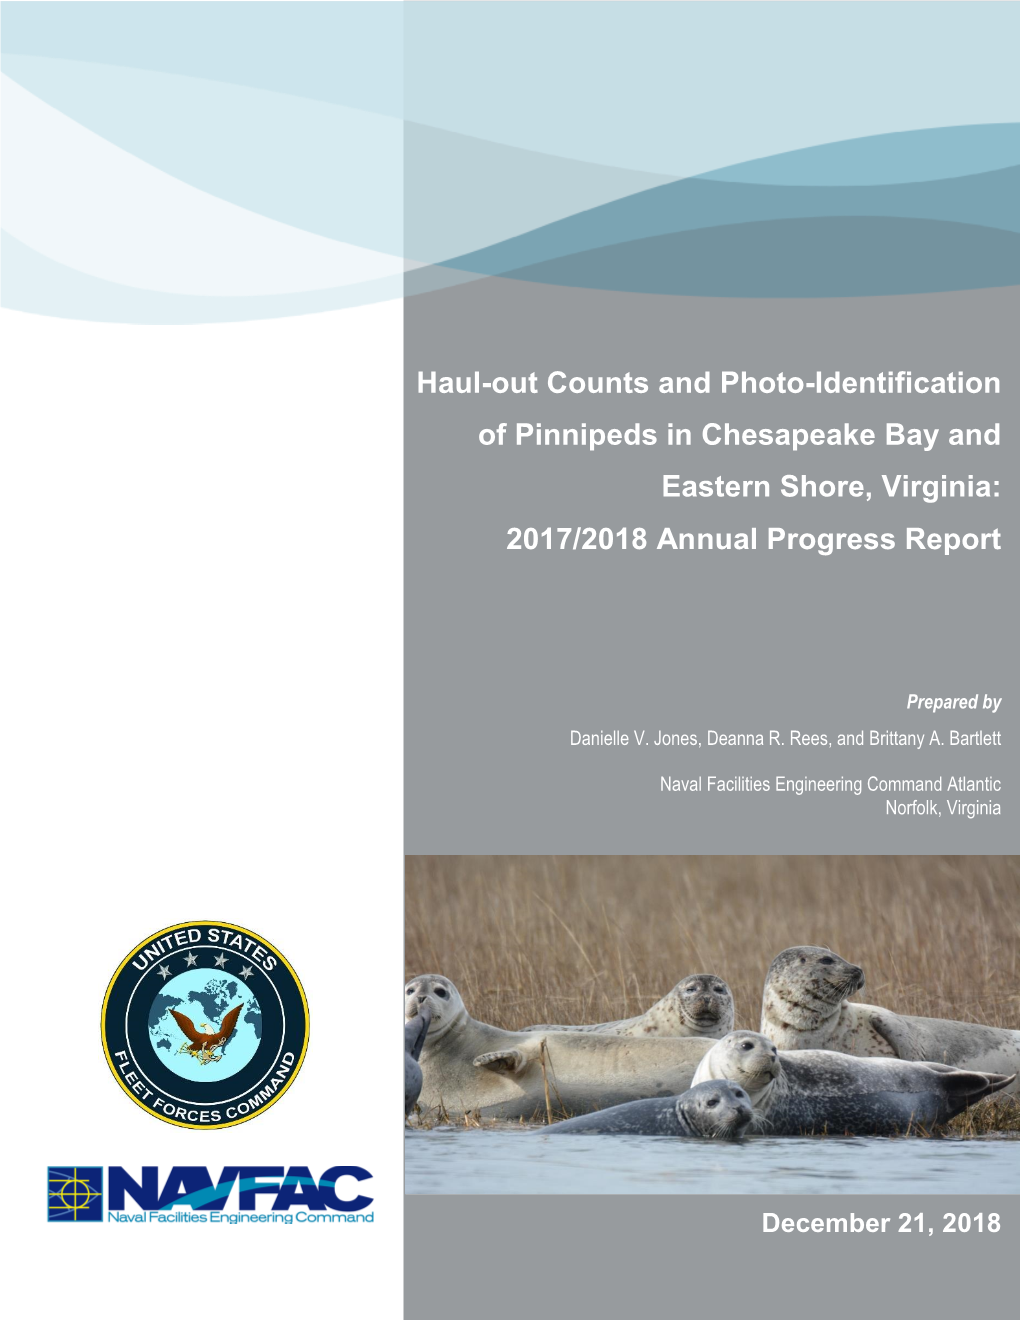 Haul-Out Counts and Photo-Identification of Pinnipeds in Chesapeake Bay and Eastern Shore, Virginia: 2017/2018 Annual Progress Report